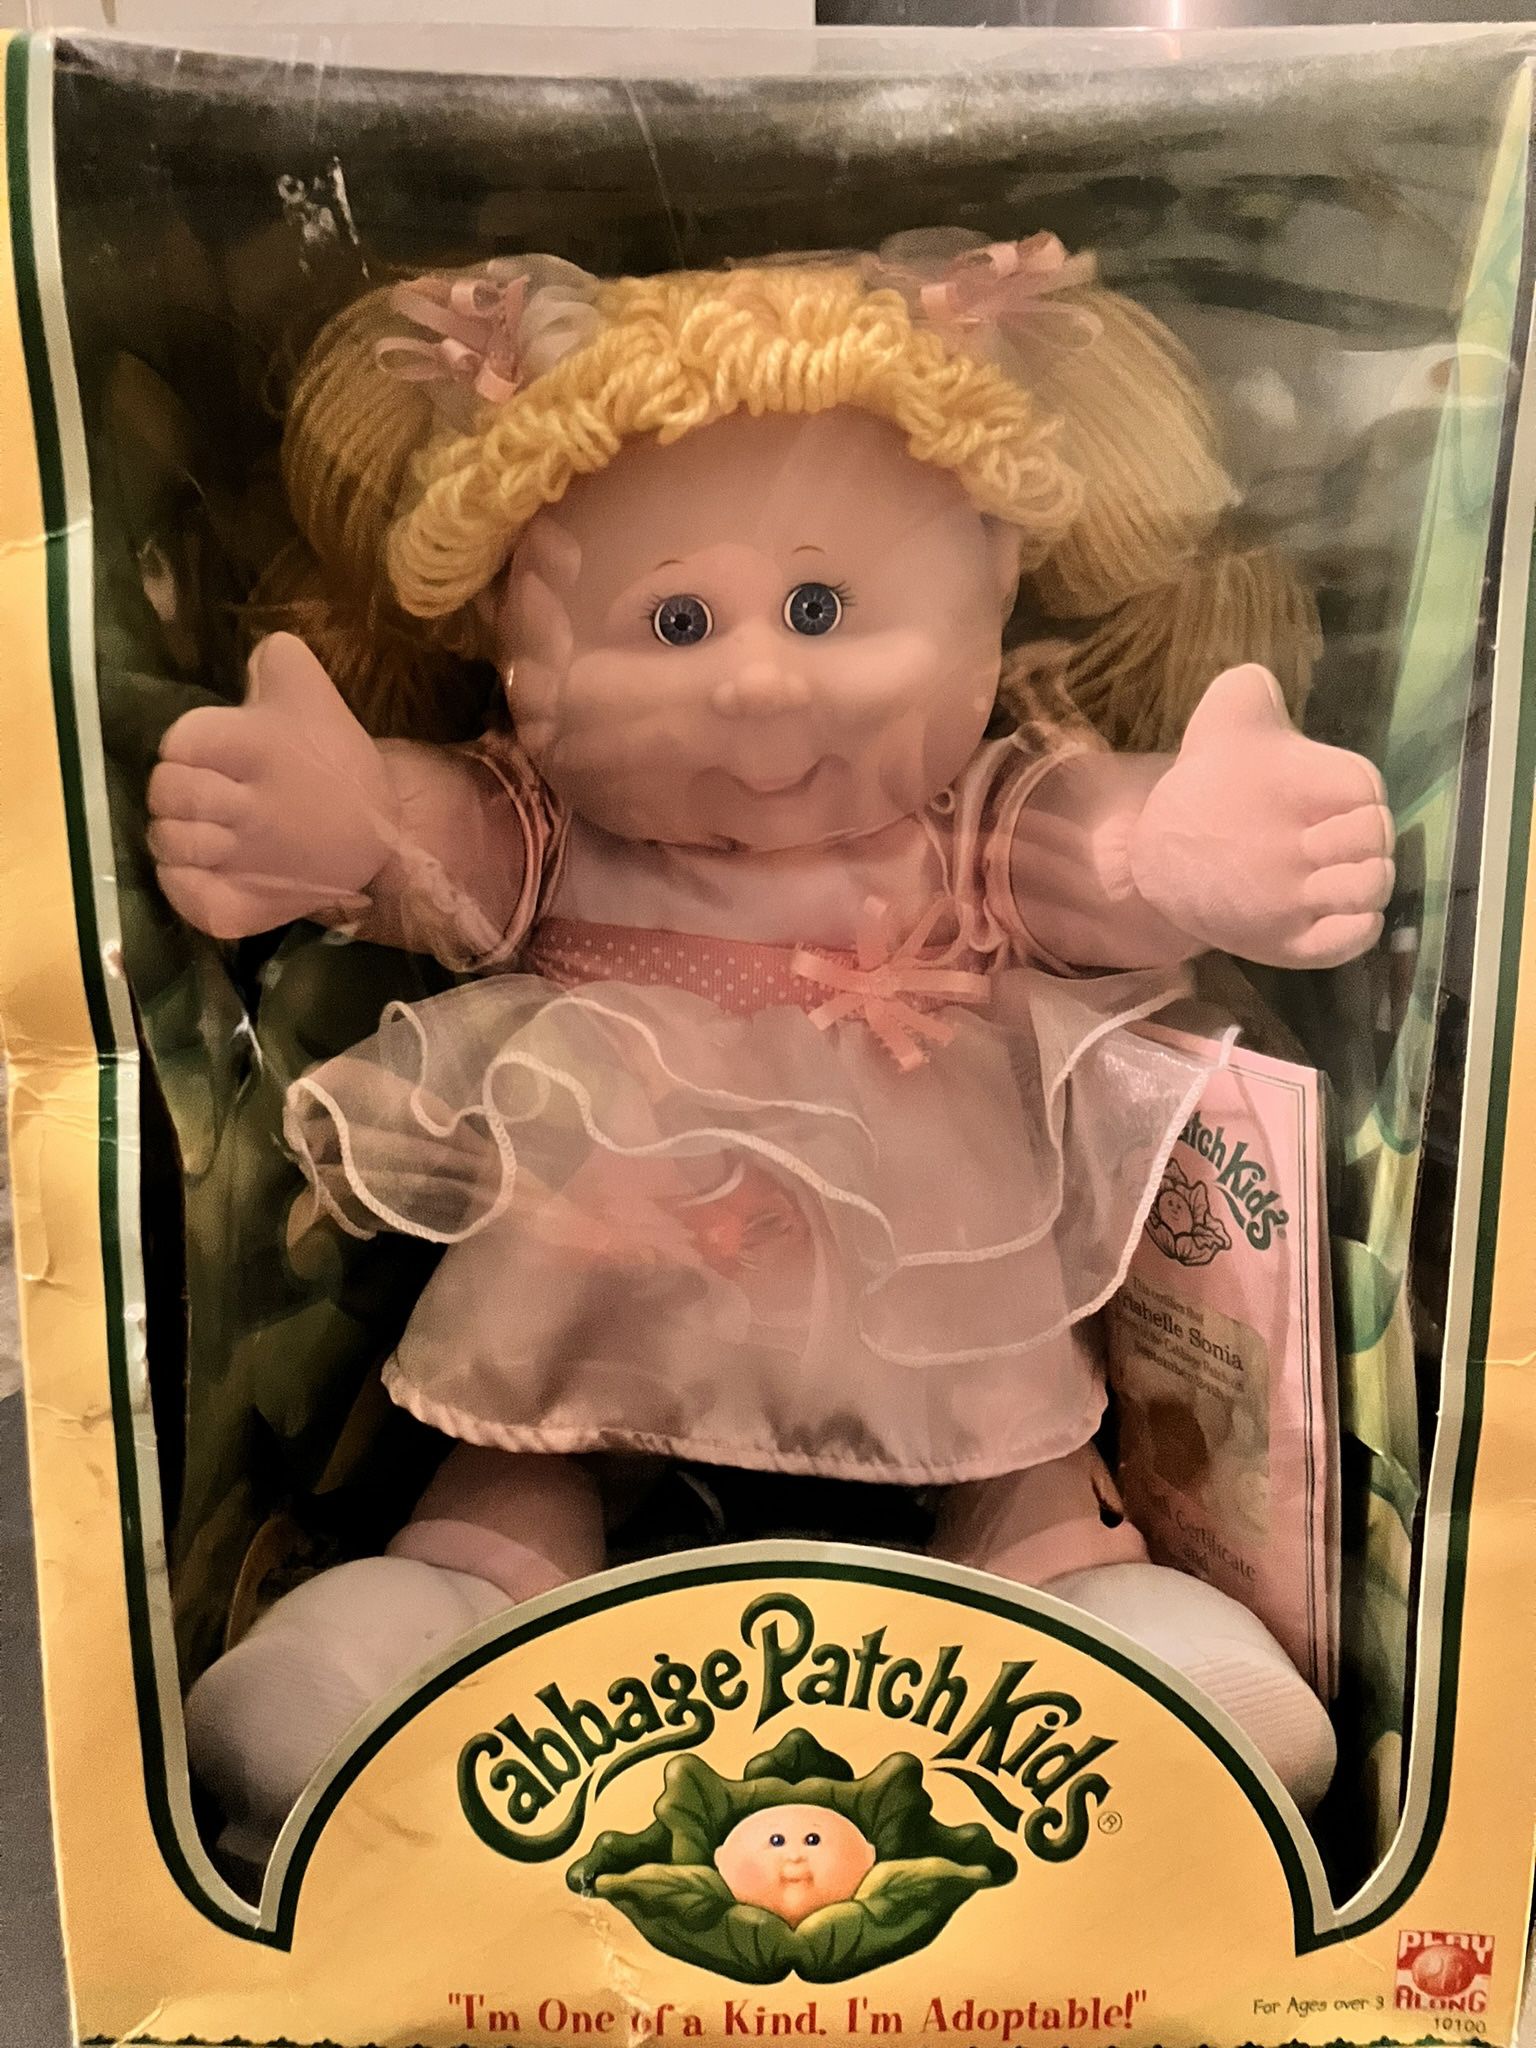 Cabbage Patch Collectors Doll Signed By Creator